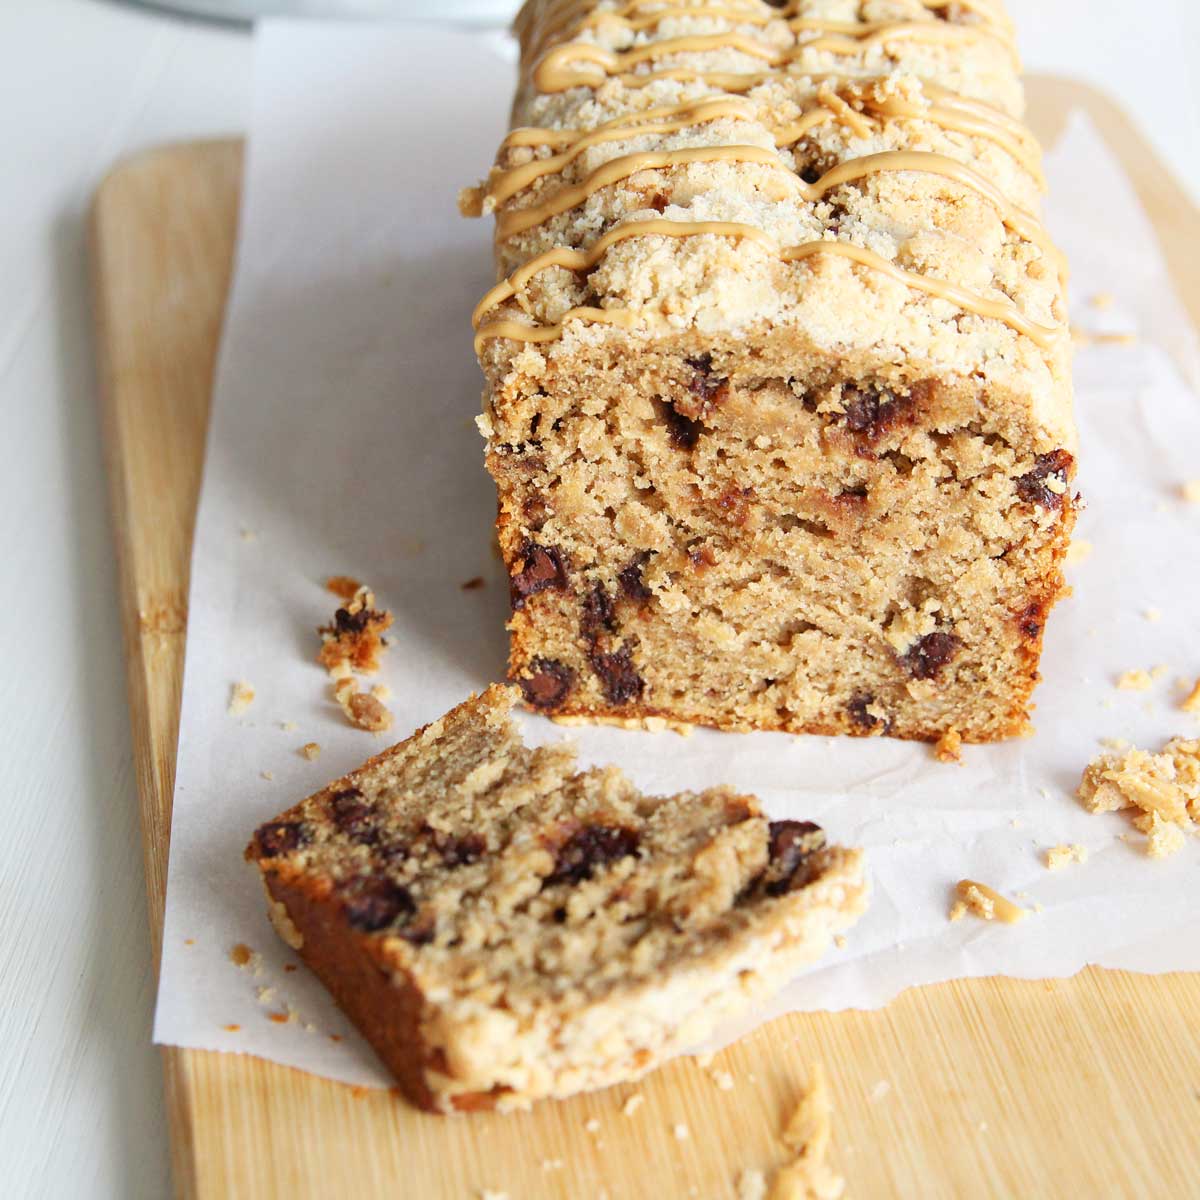 Coffee Lover's Chocolate Chip Banana Bread (No Eggs, Butter, or Dairy) - Pumpkin Bread With Banana